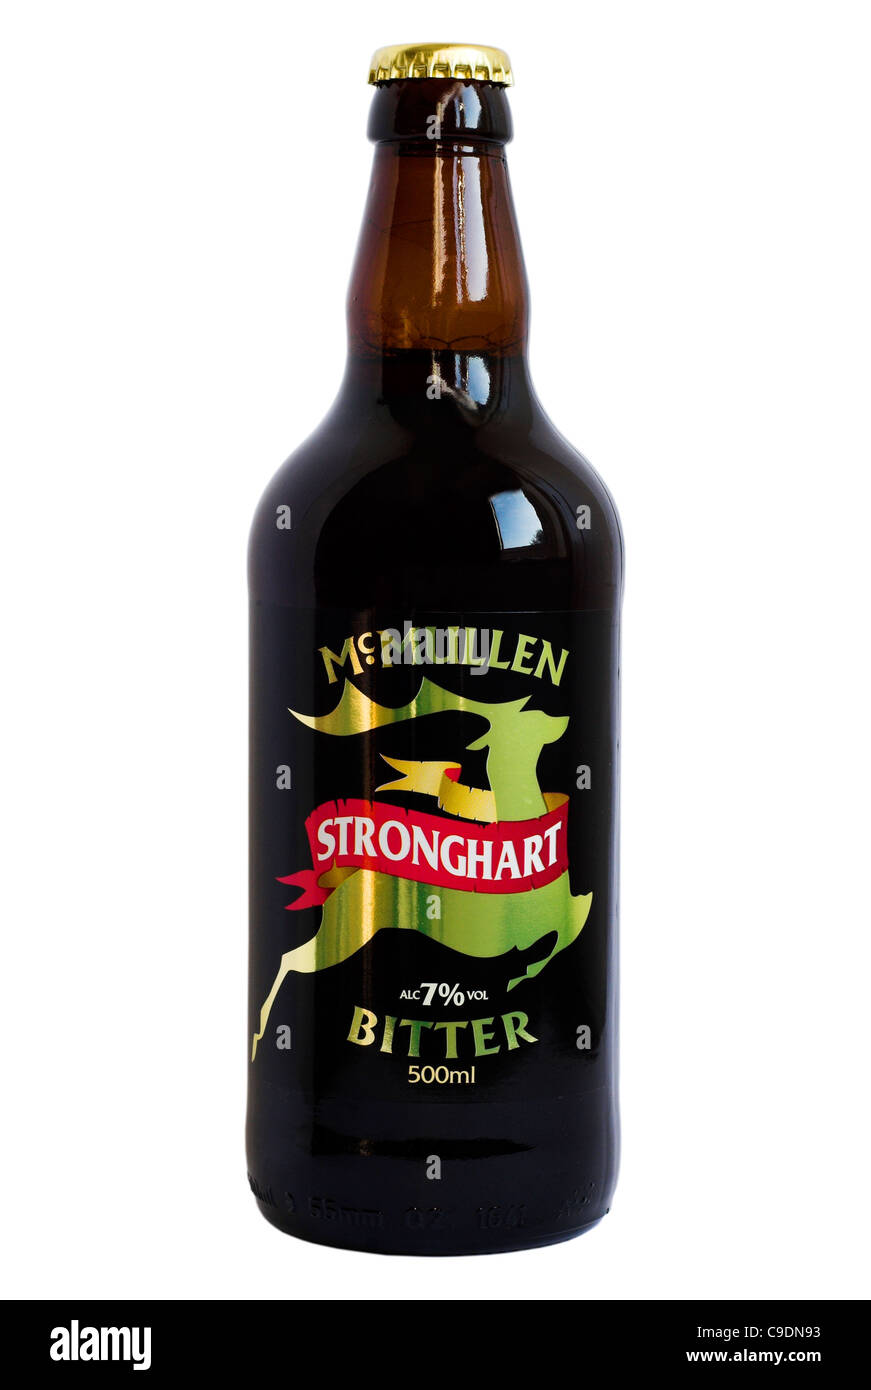 McMullen Brewery Stronghary Bitter beer bottle - current @ 2011. Stock Photo